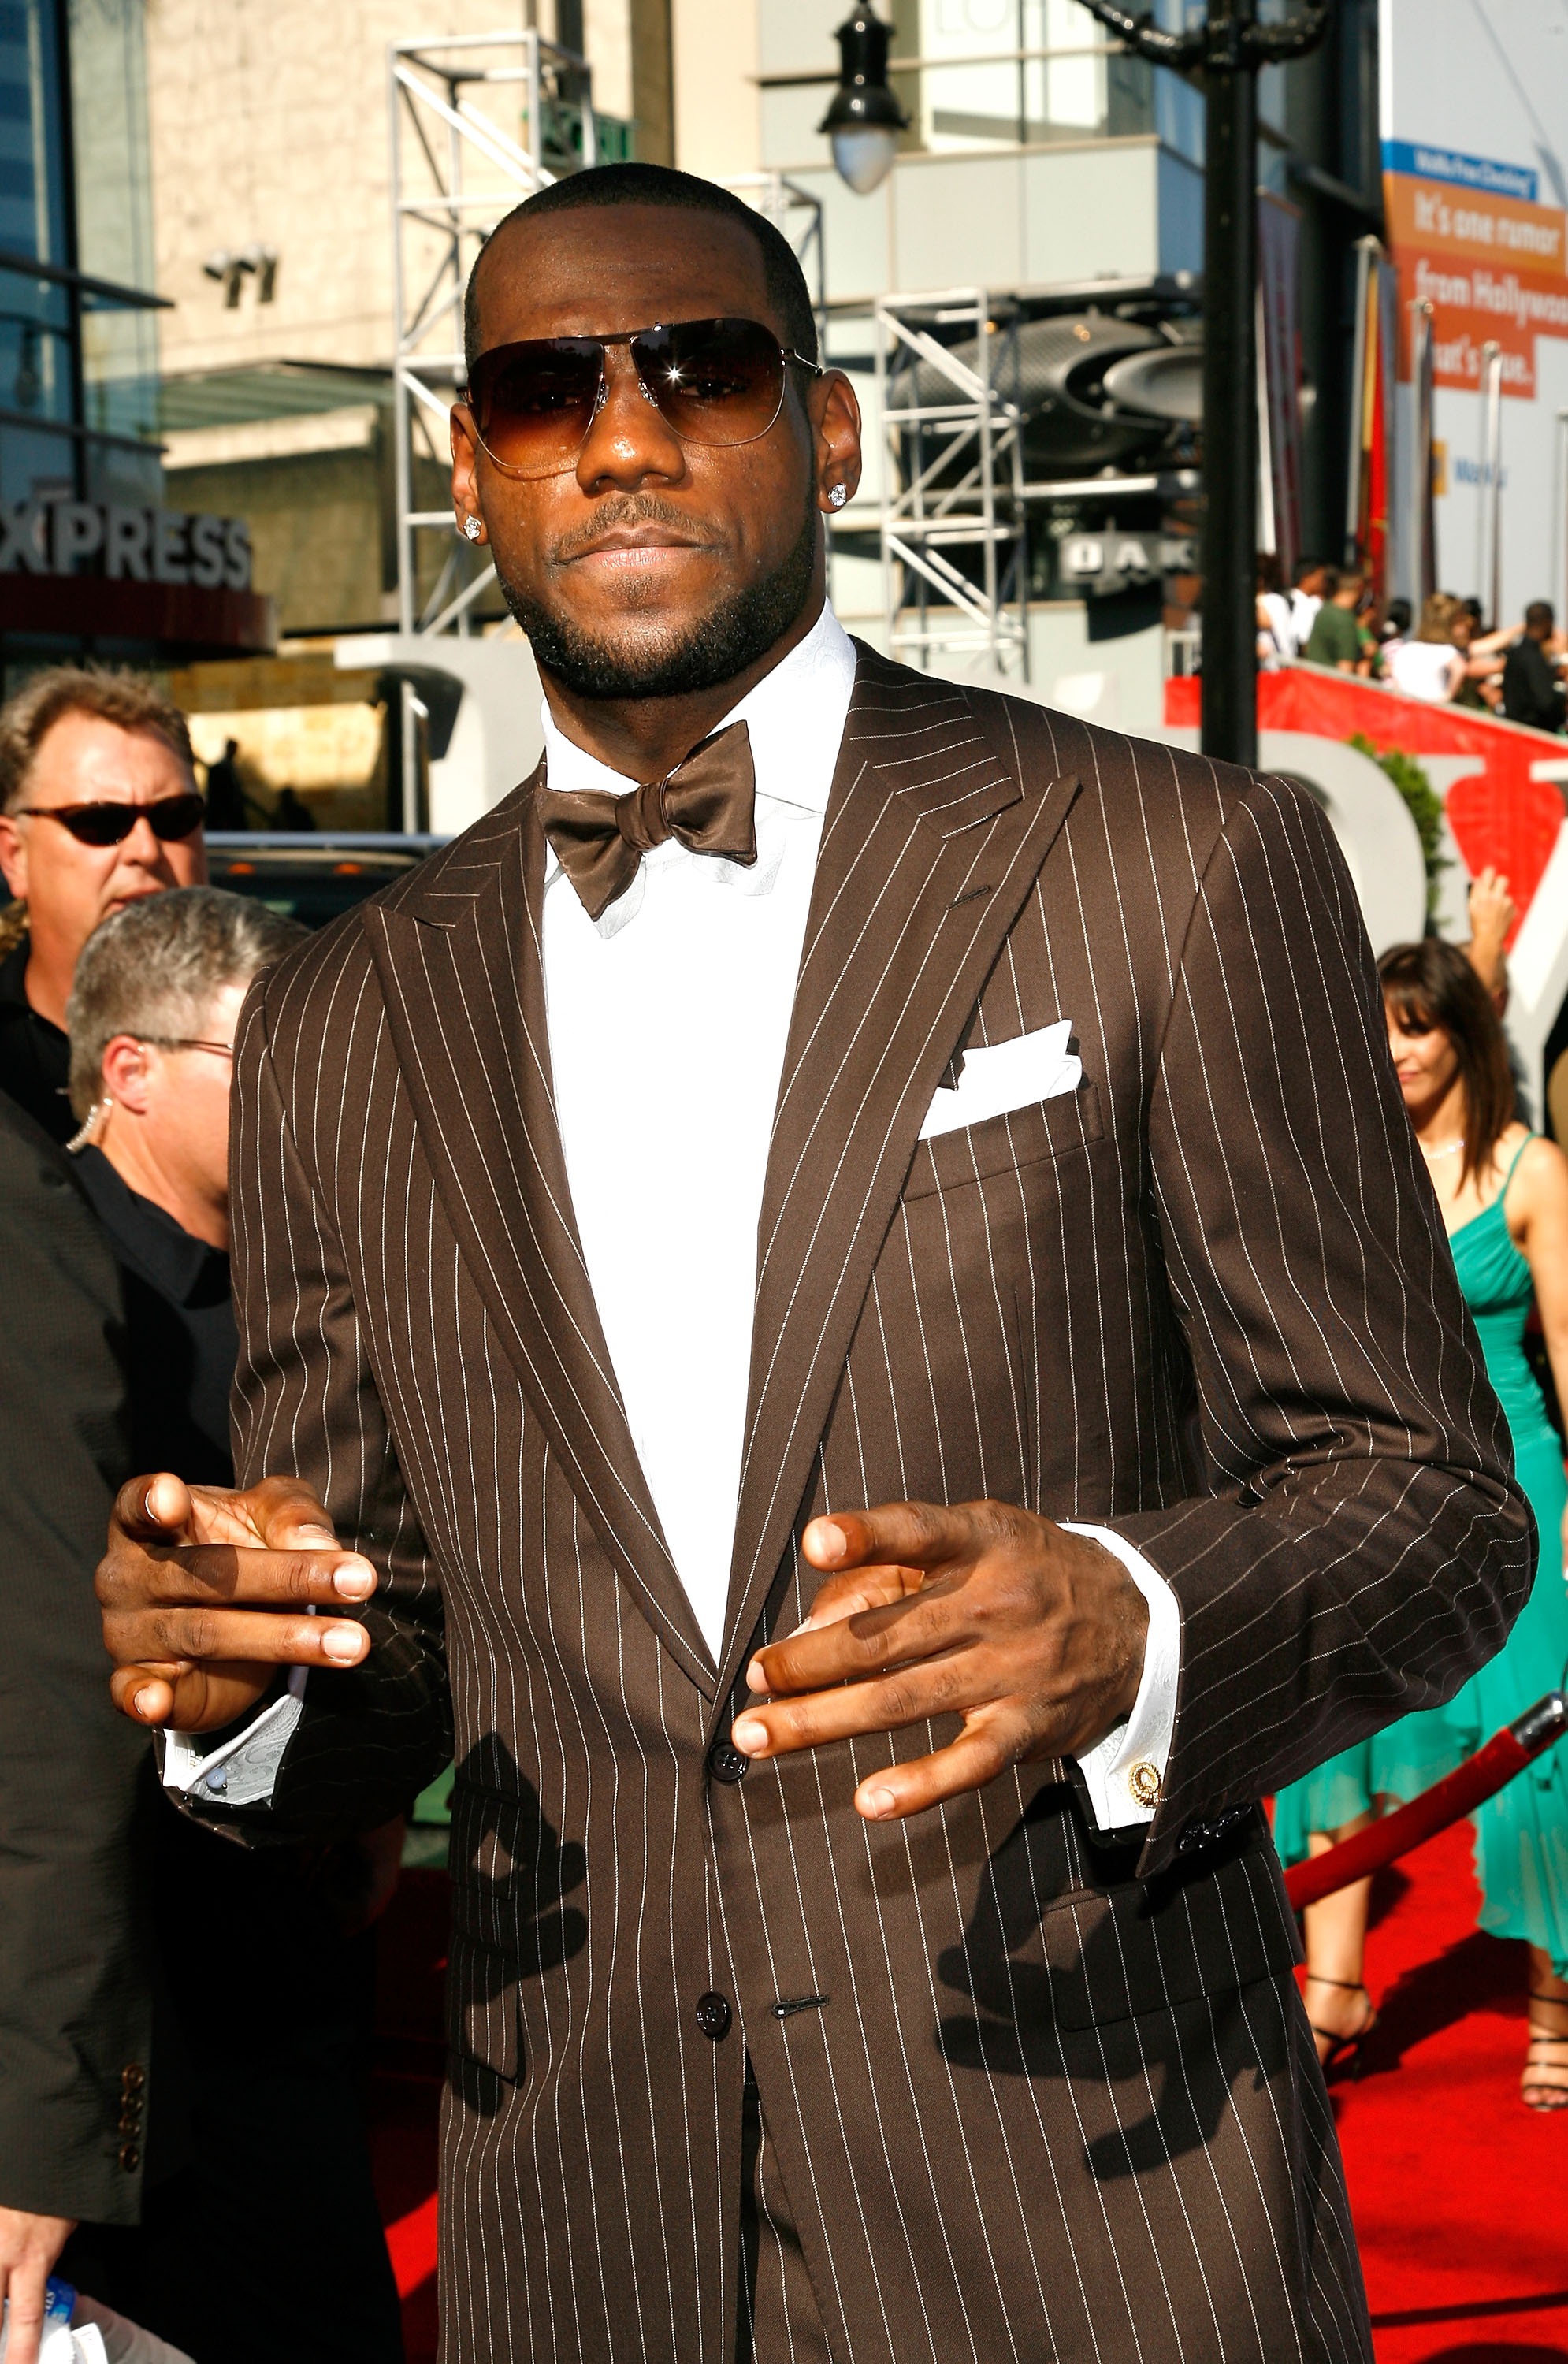 LeBron James Rumors: Crazy Things to Happen at James' Decision | Bleacher Report ...